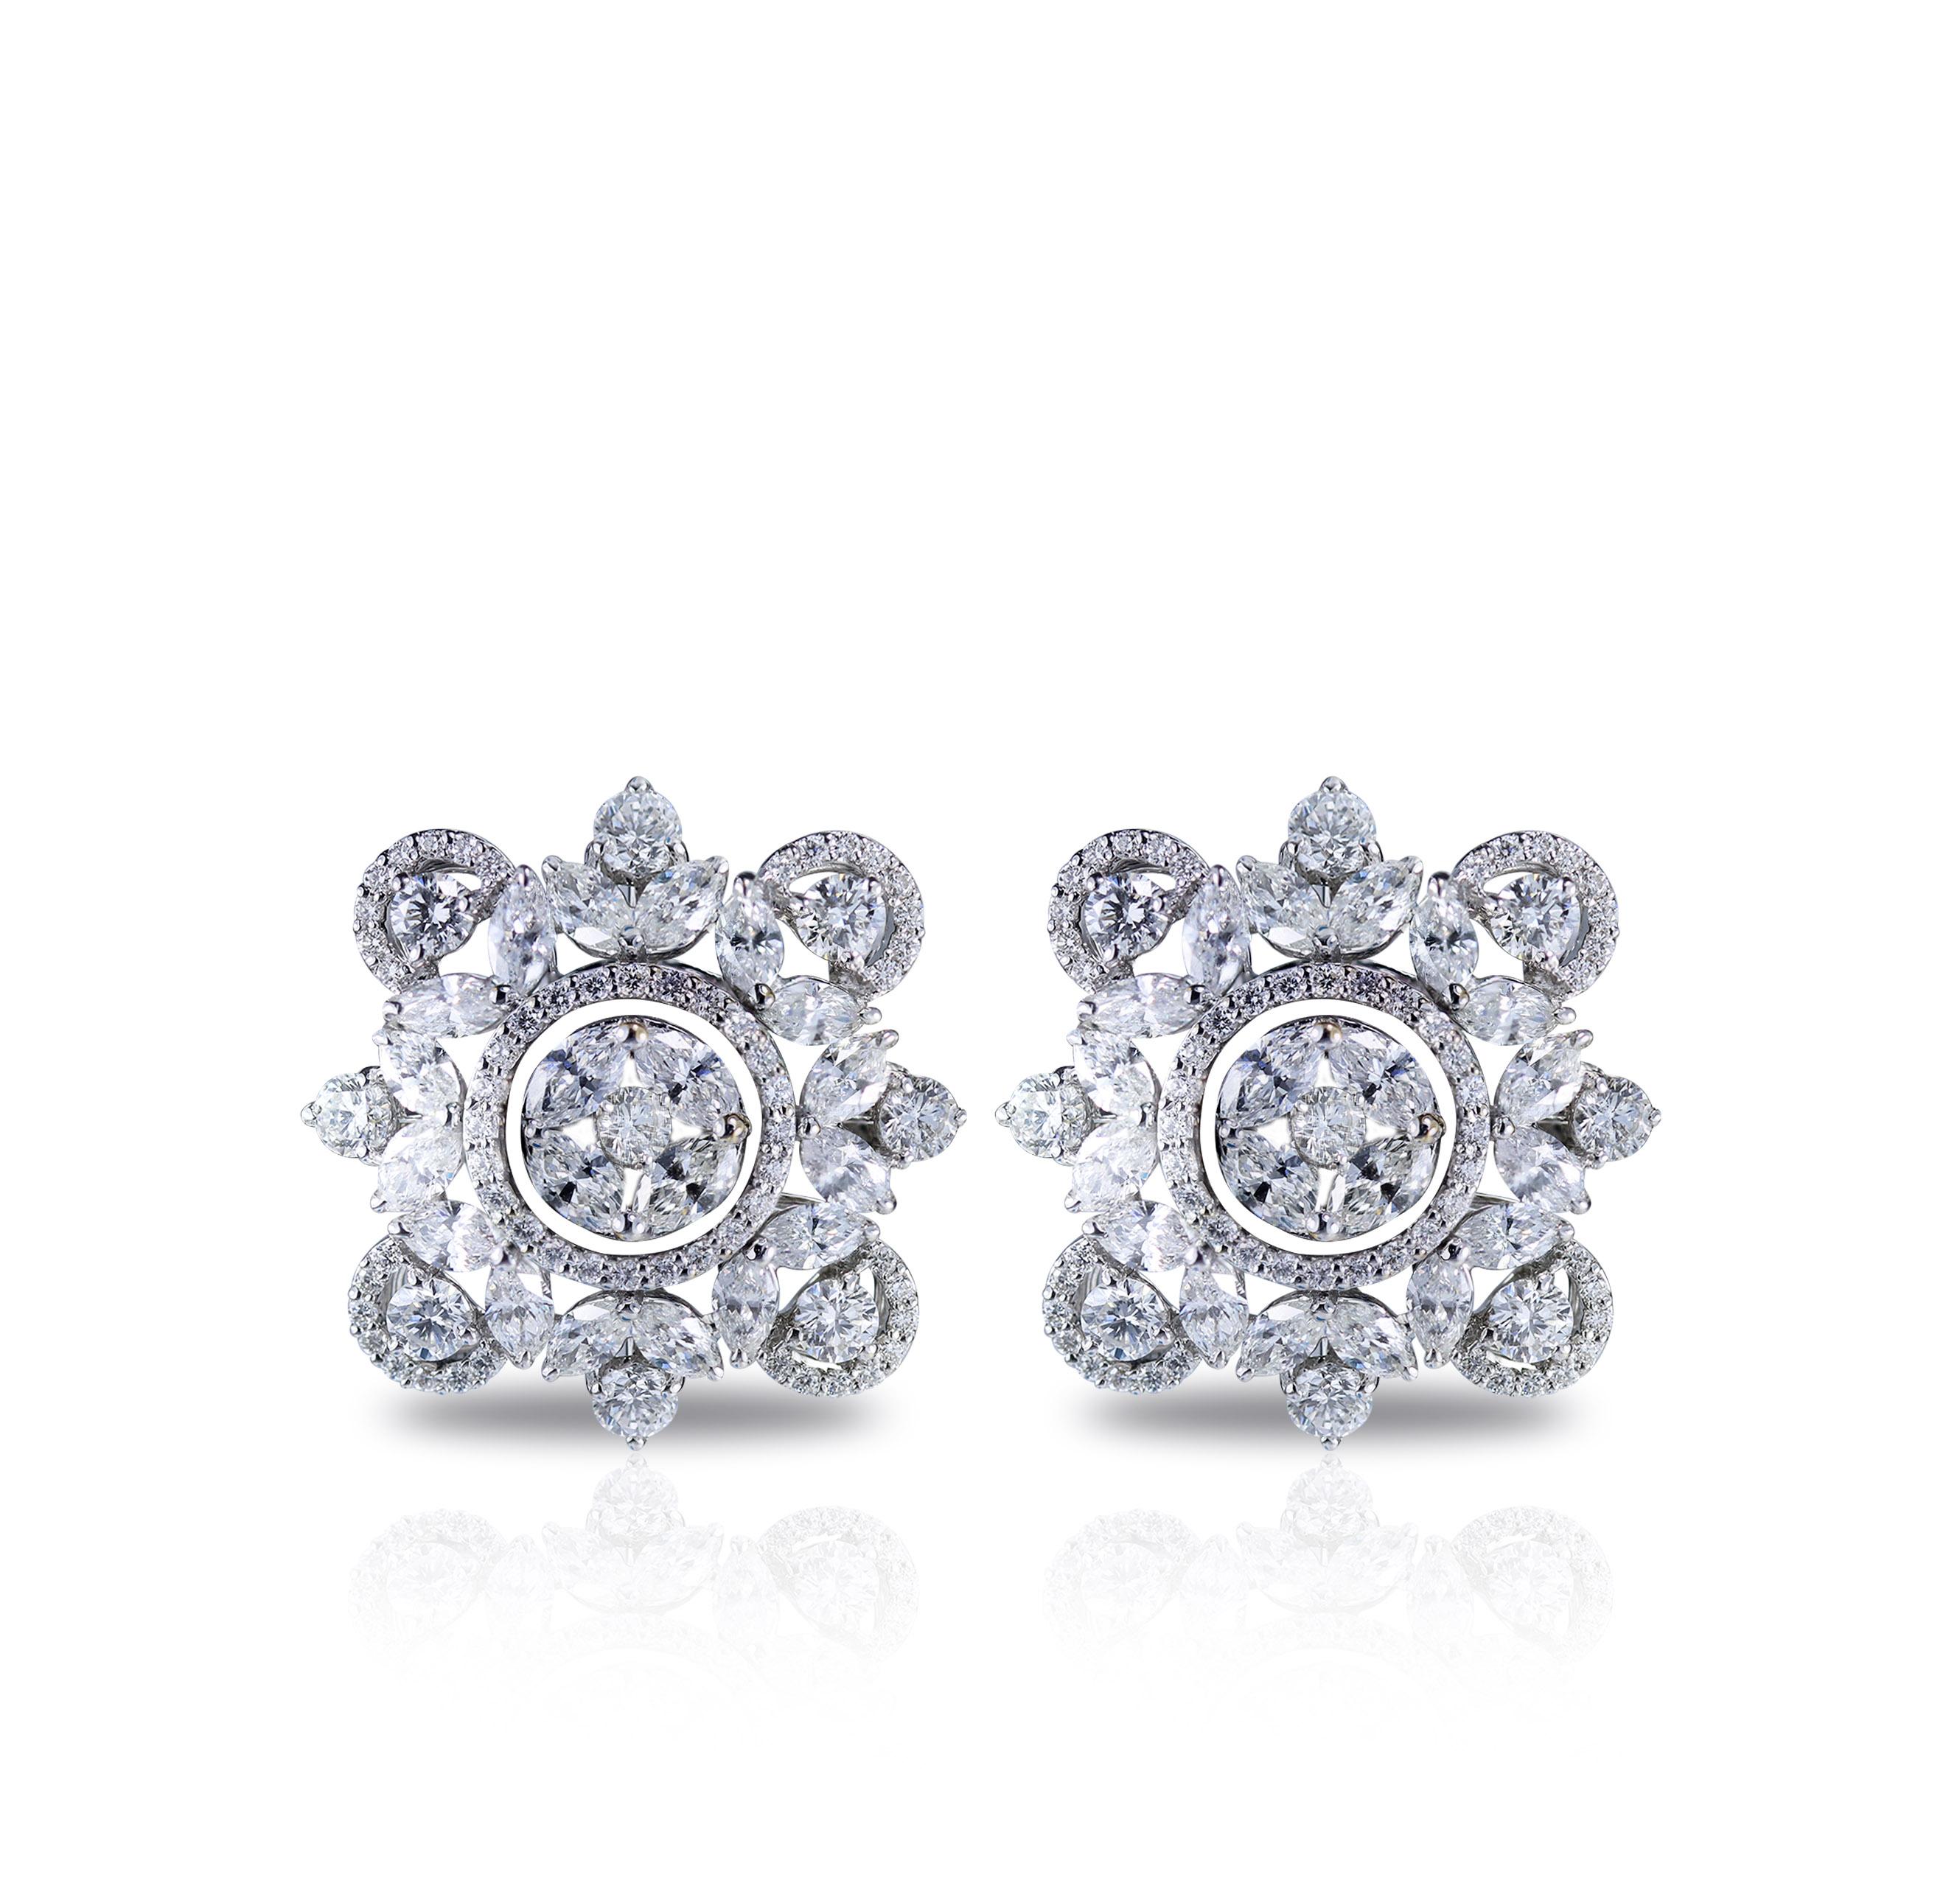 18K white gold and diamond studs

Diamonds are forever, and this 18K white gold earrings studded with round and marquise and brilliant cut diamonds in a prong setting is testimony to the fact. Artfully handcrafted by our craftsmen, it brings